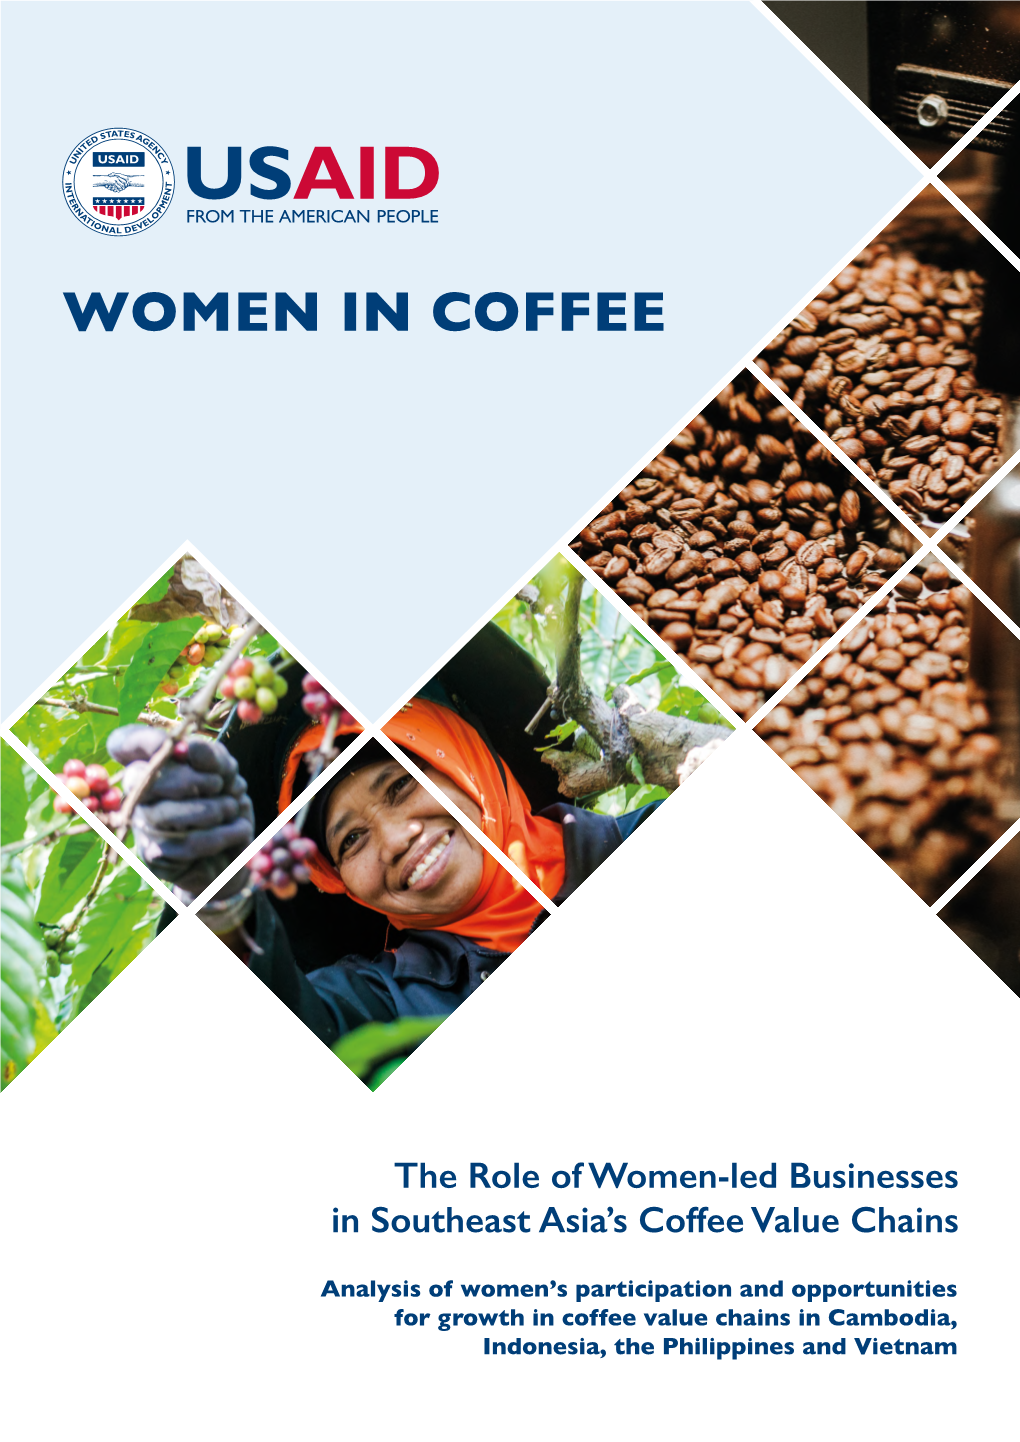 The Role of Women-Led Businesses in Southeast Asia's Coffee